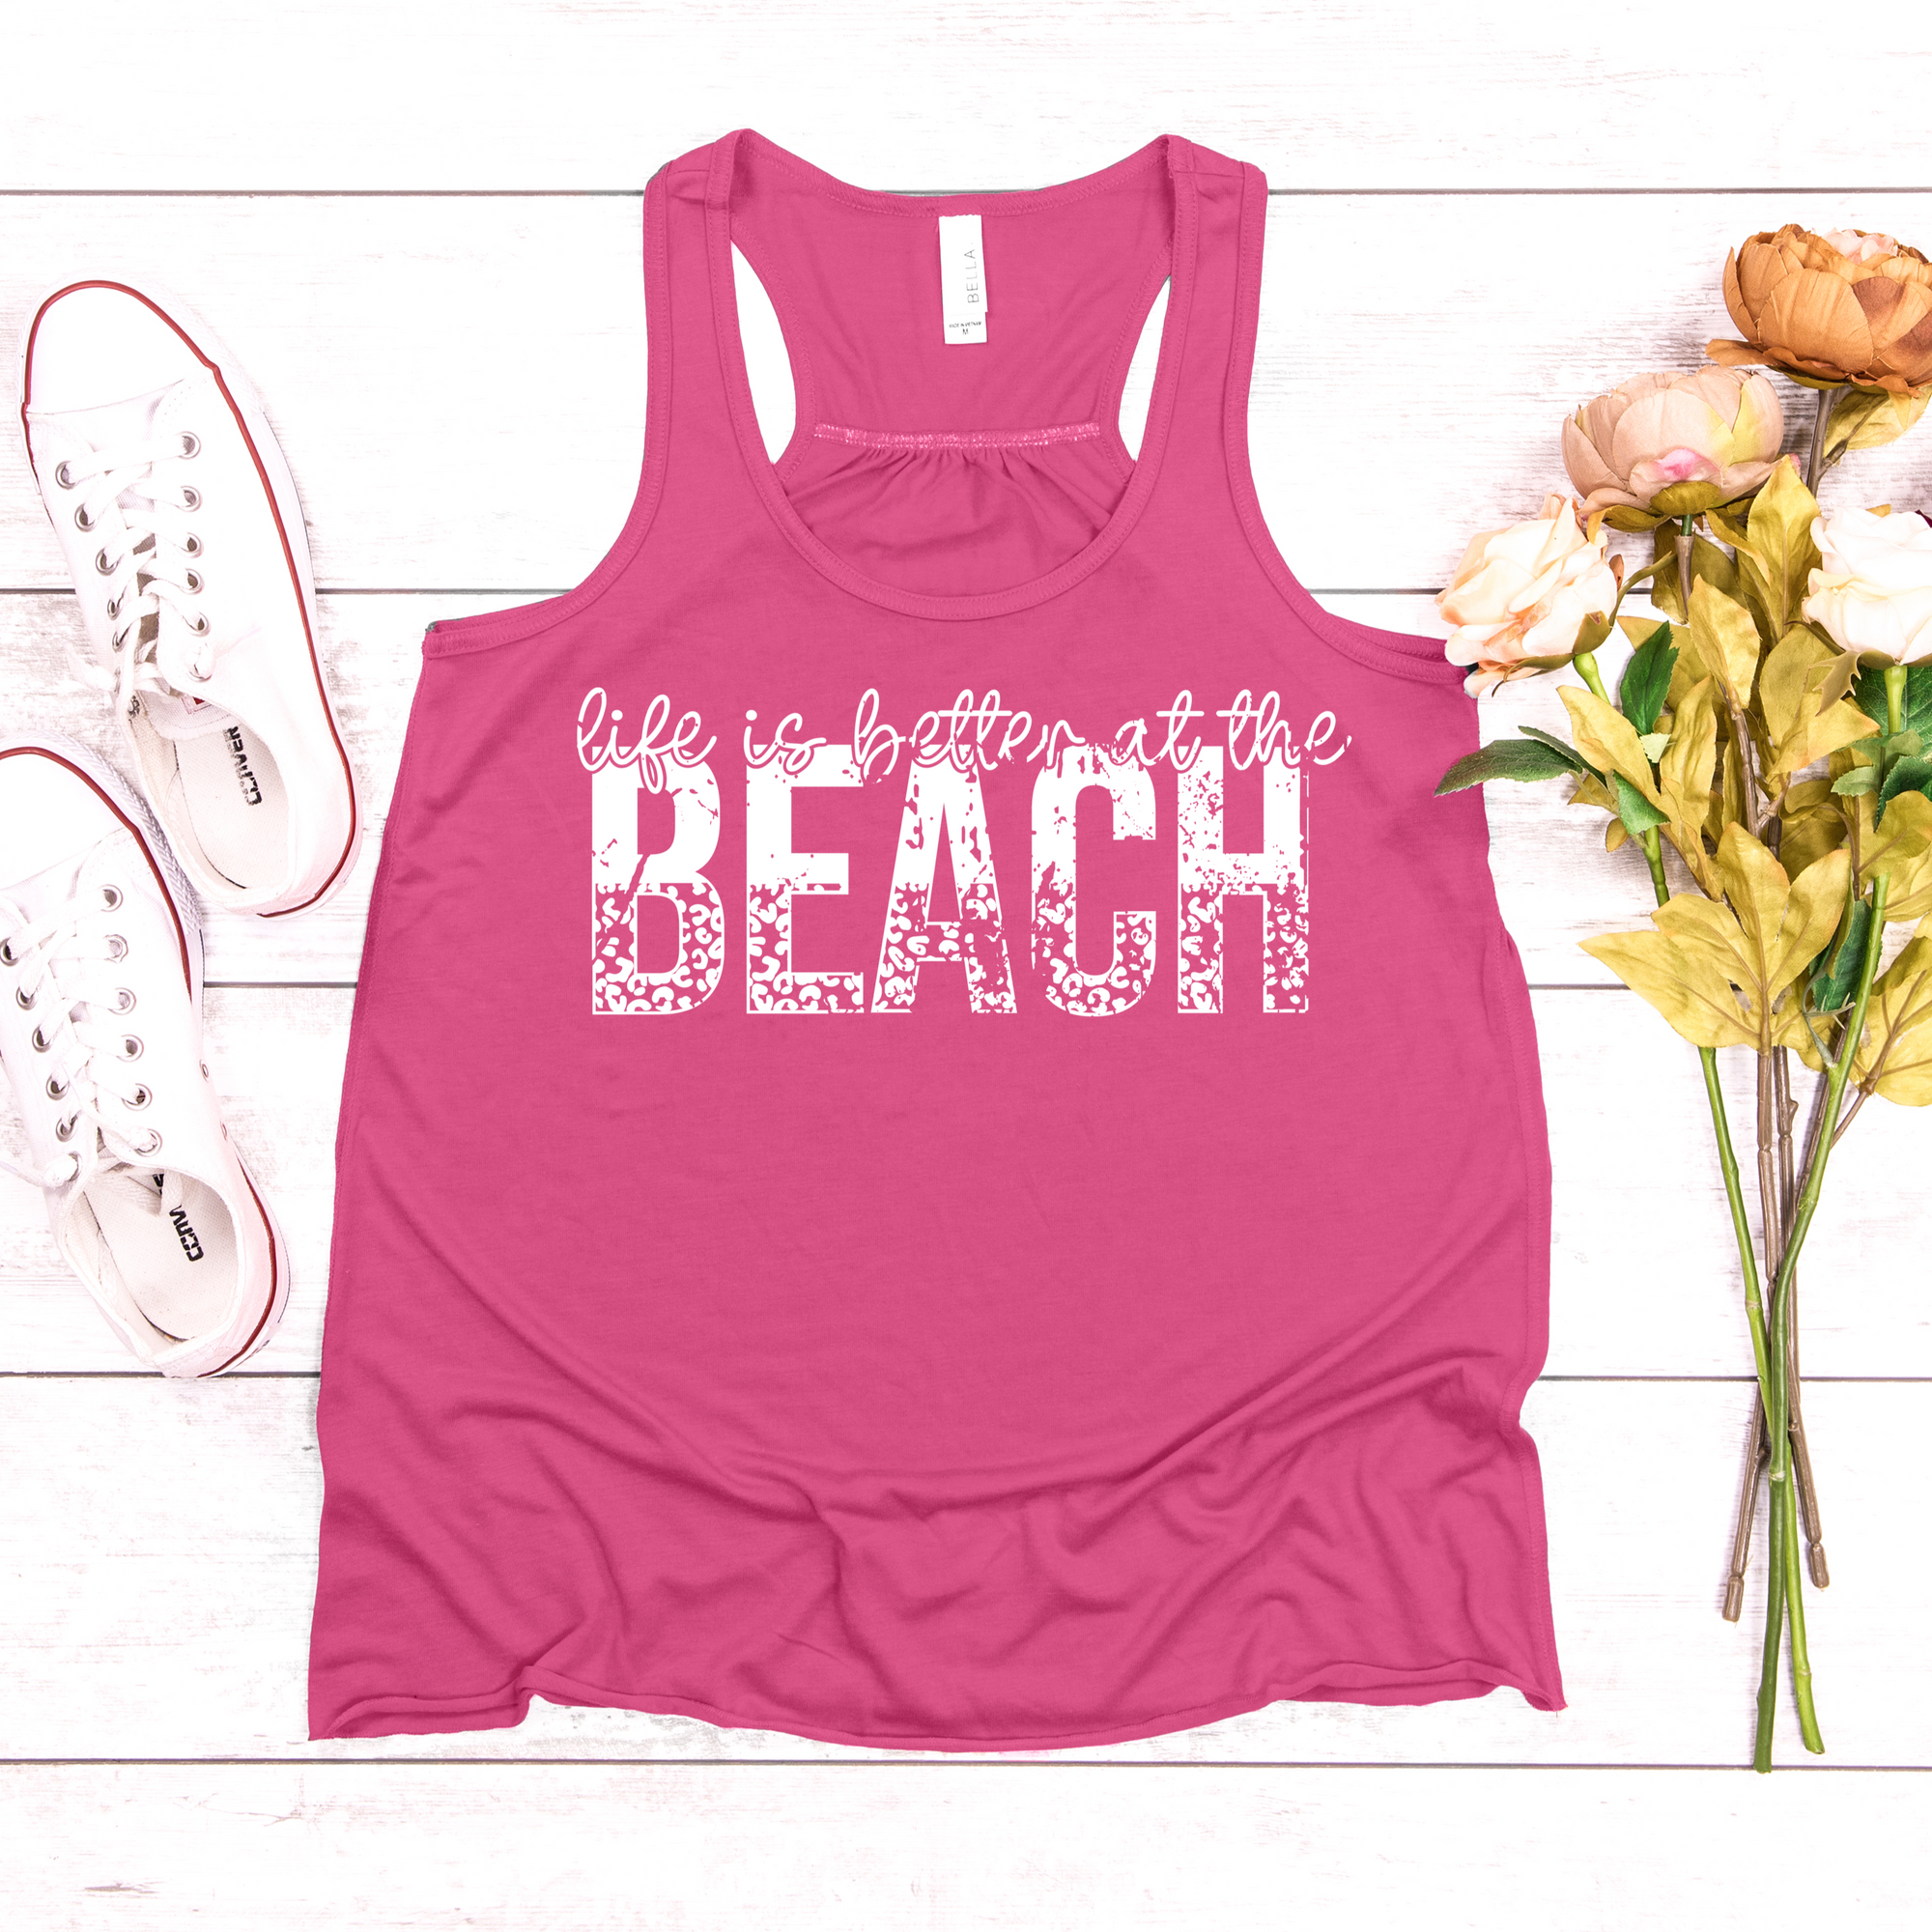 Life Is Better At the Beach Tee or Tank